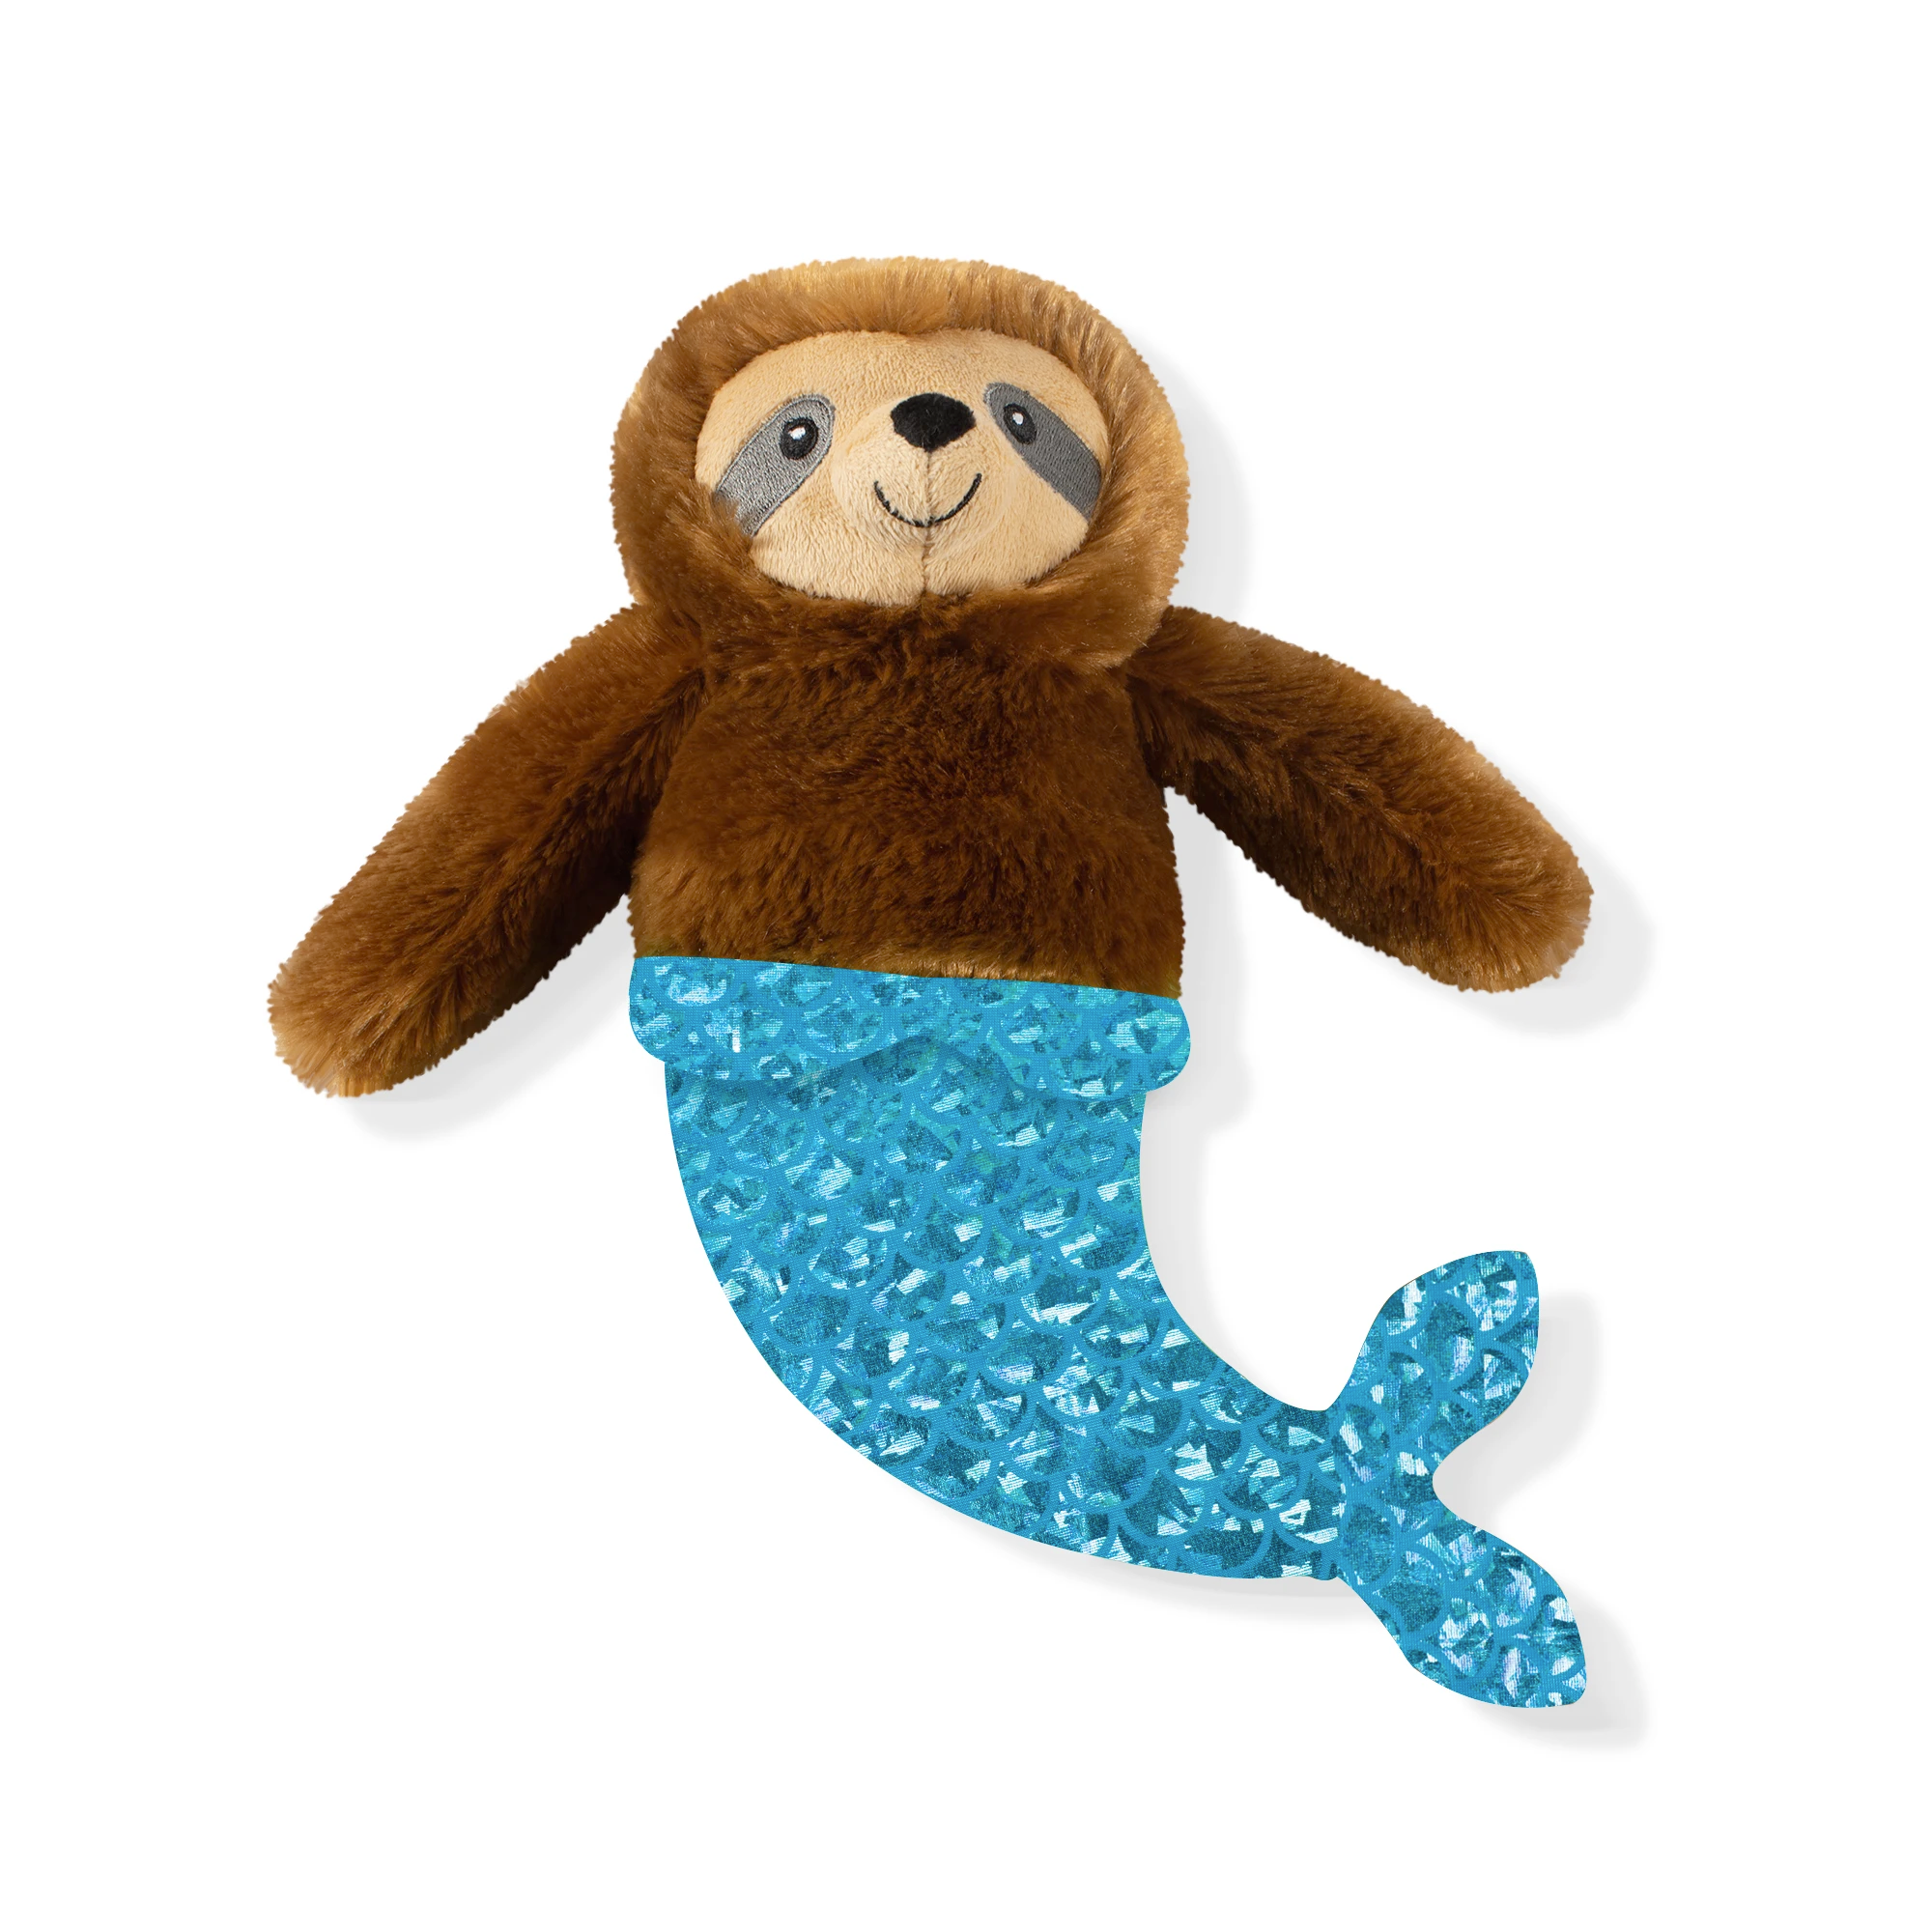 Starfish the Magical Mersloth, Dog Squeaky Plush toy